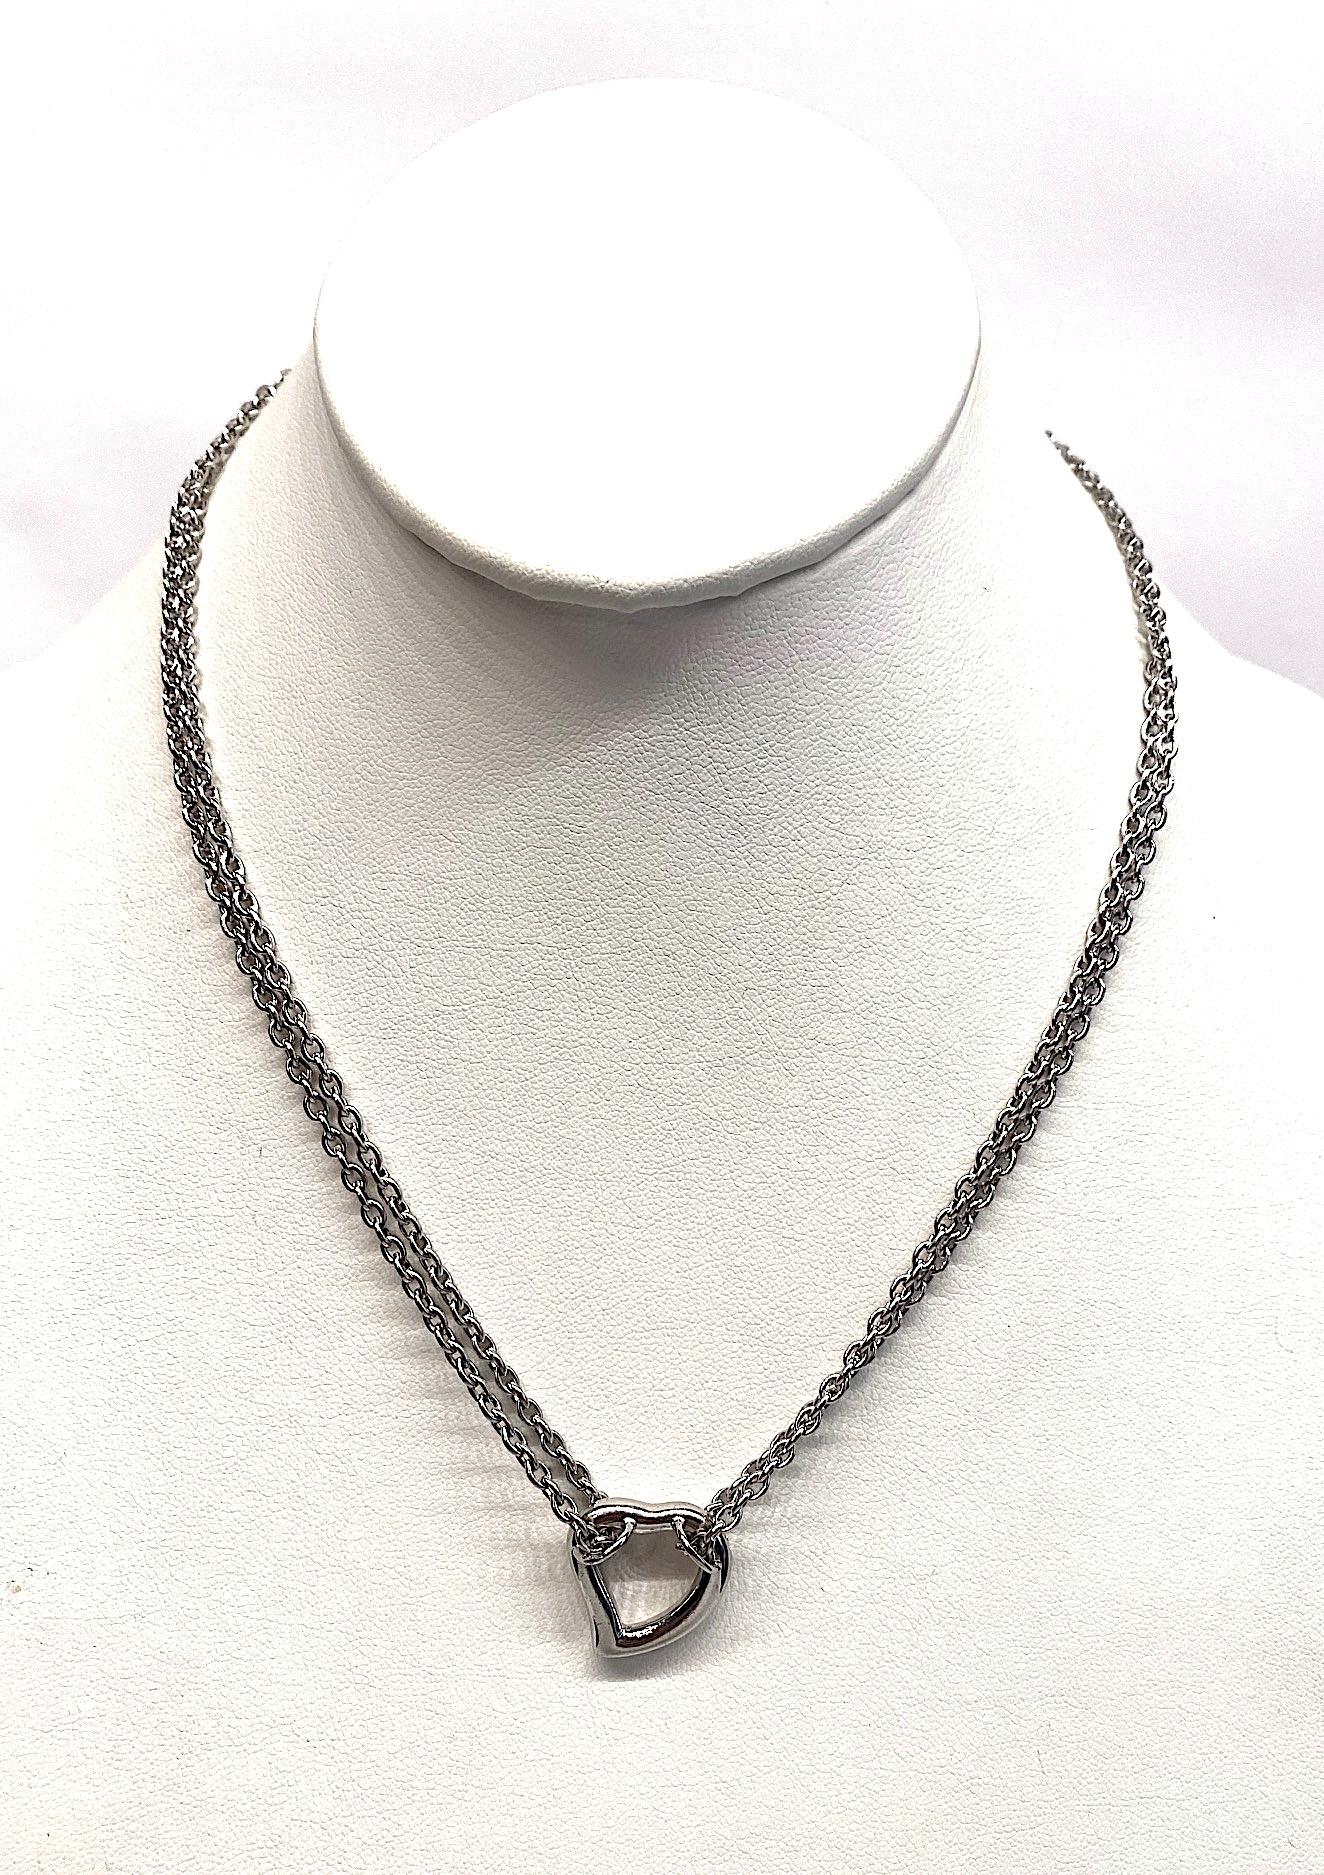 A double strand sterling silver heart pendant necklace by Yves Saint Laurent. Each side of the necklace is a sterling cable link strand that start at the clasp, descends down to the hear, loops through it and back up to the clasp 7.5 inches long. An